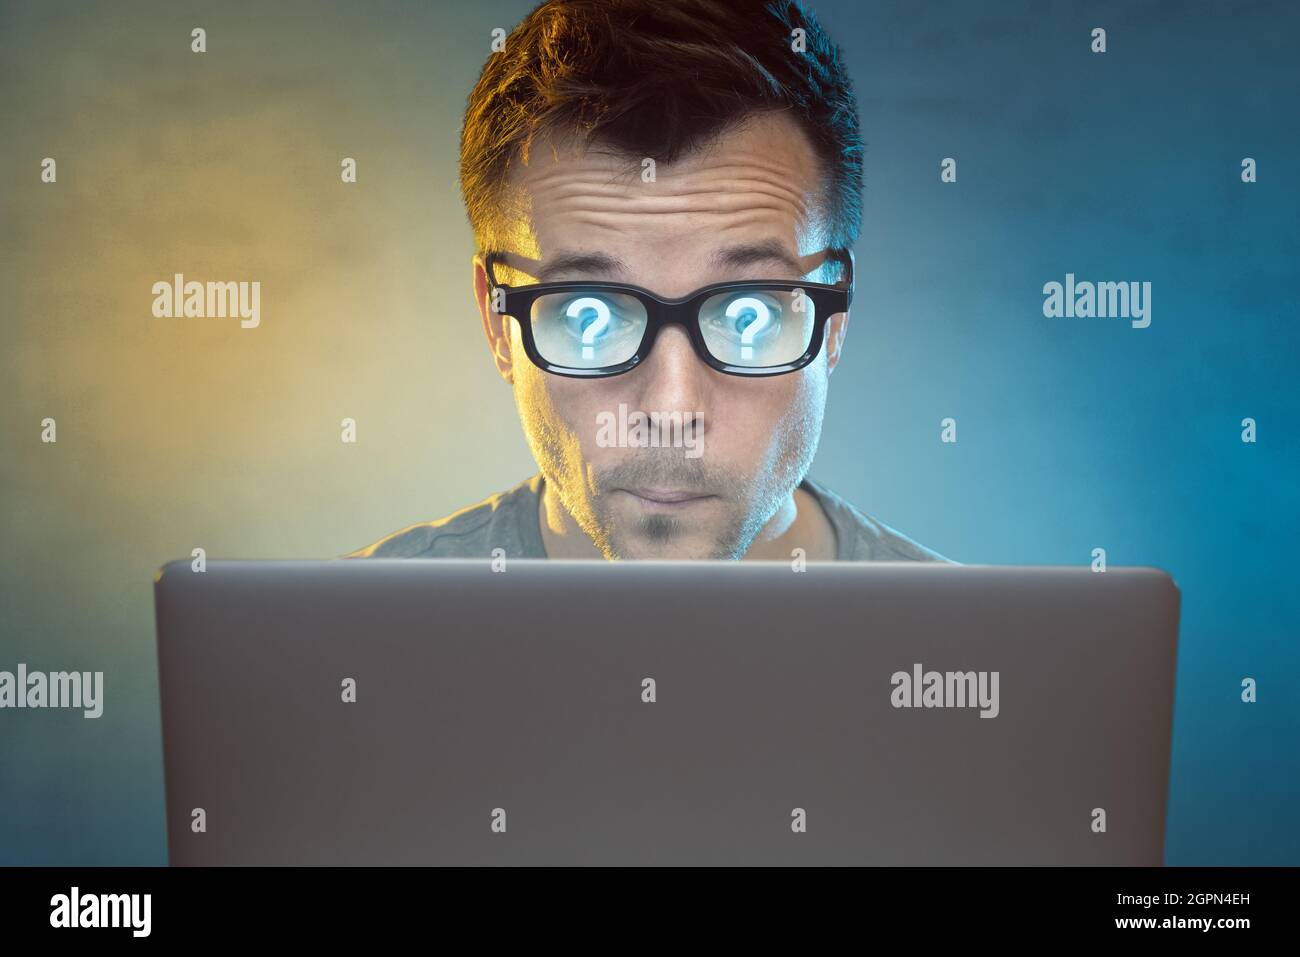 Wondering man in front of a laptop monitor Stock Photo